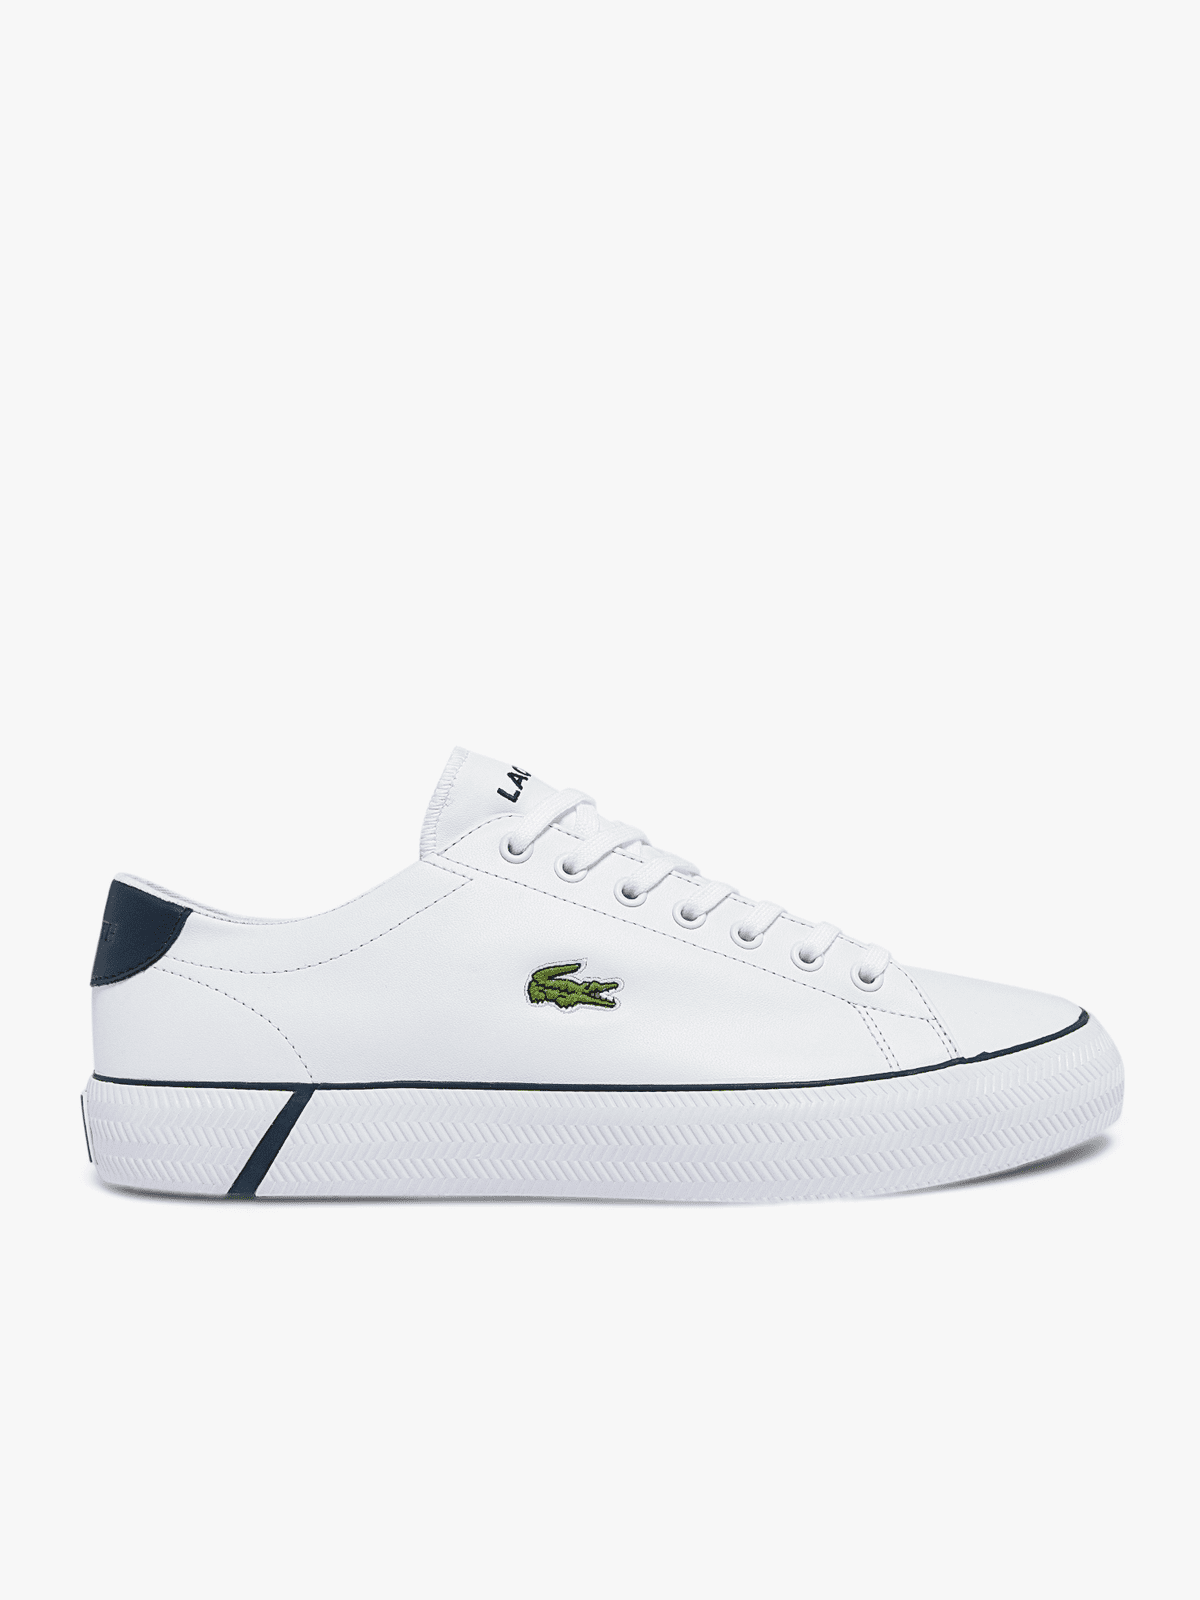 Lacoste Men's Gripshot Leather and Synthetic Sneakers White/Navy 41CMA0014 042.